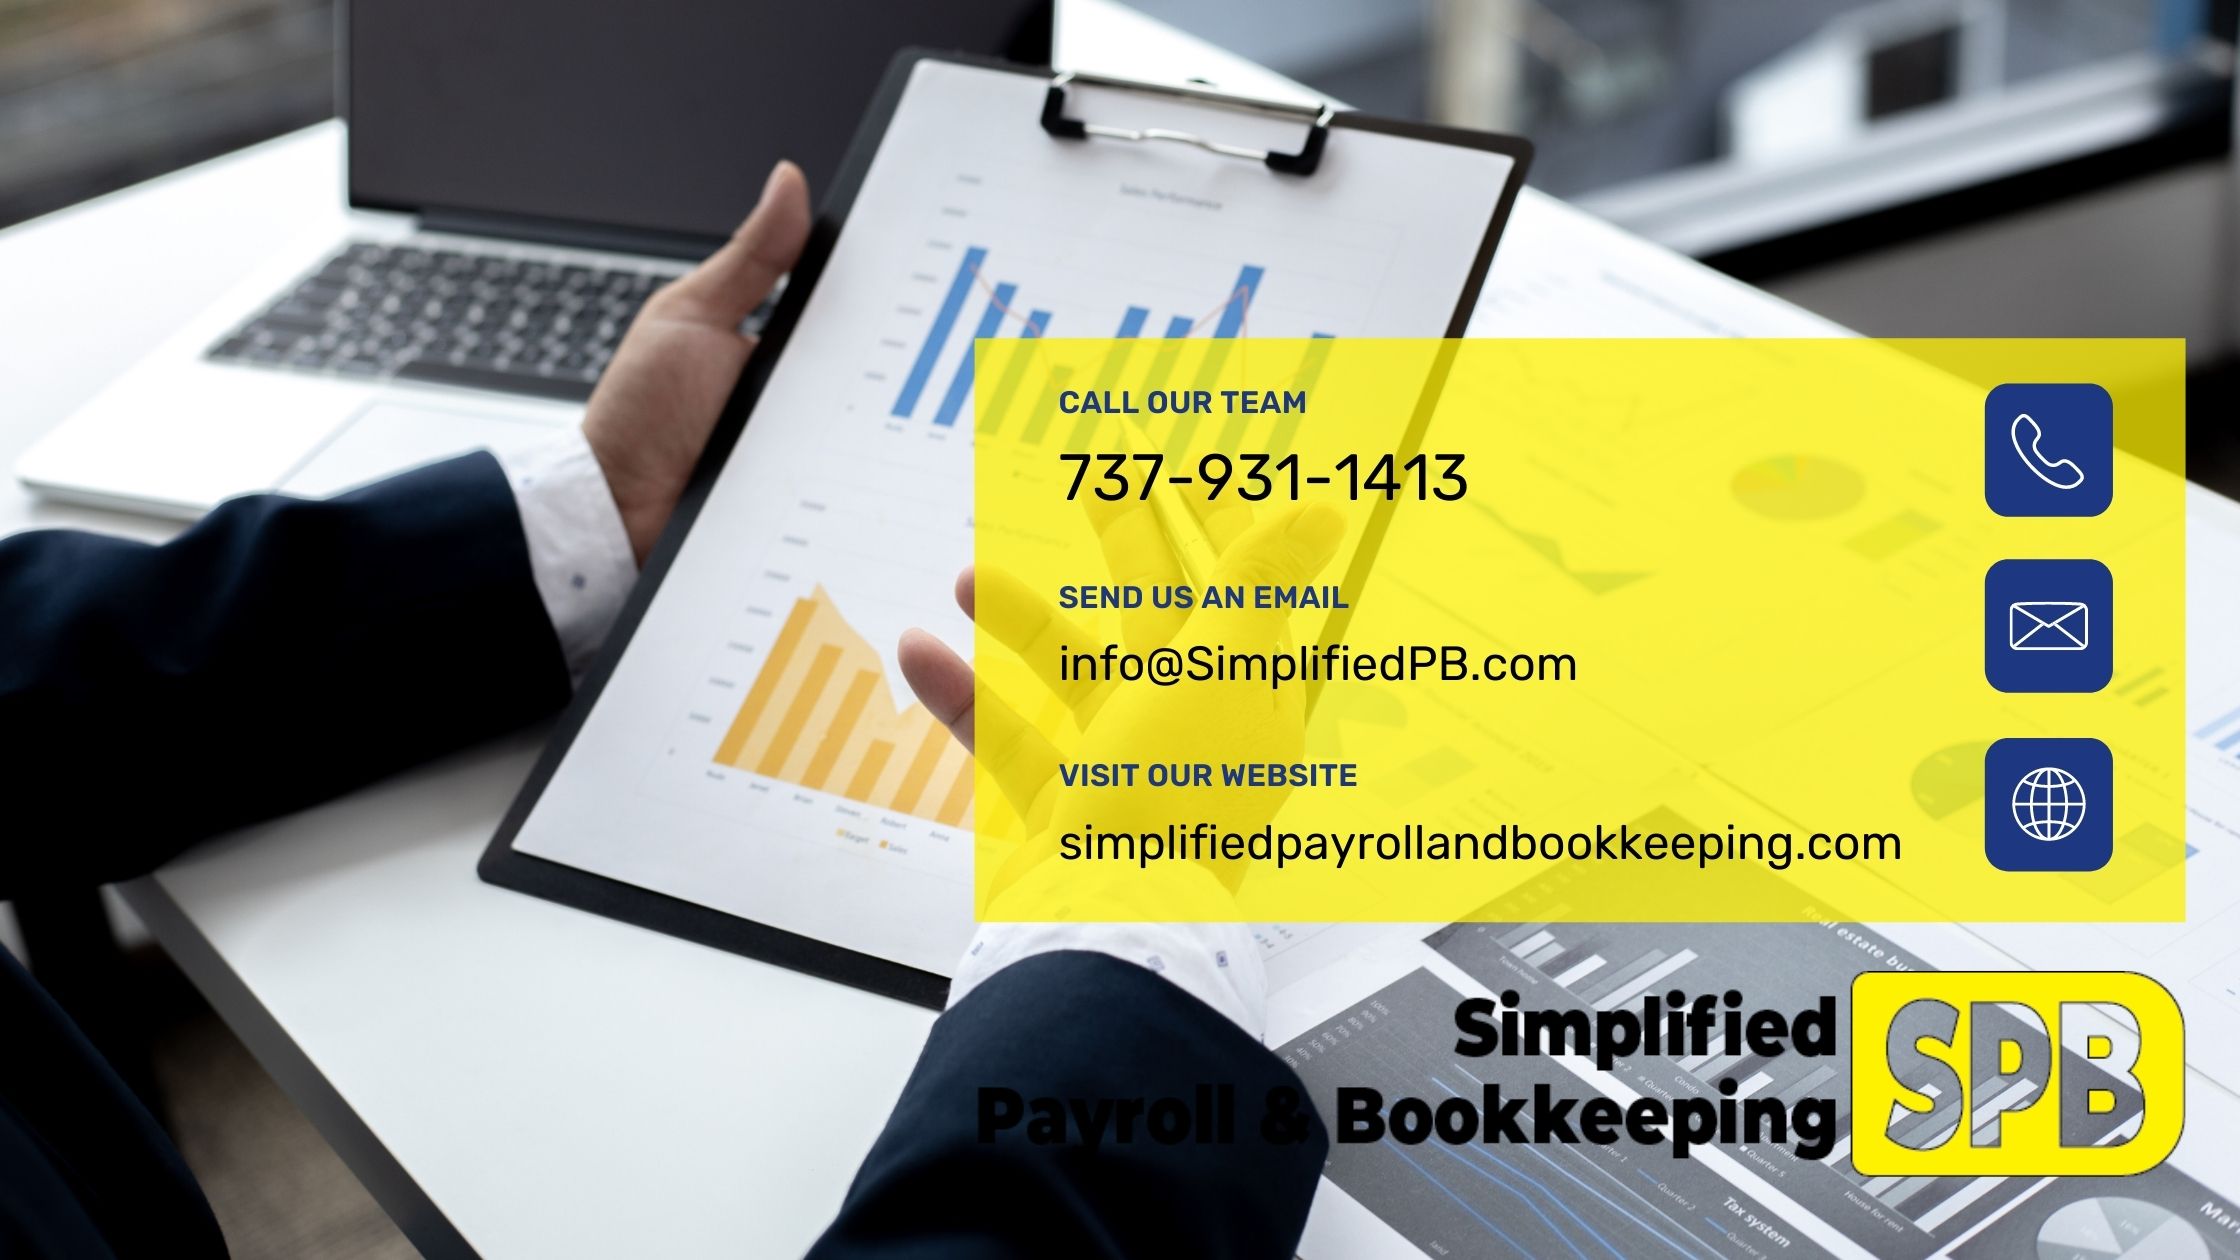 what is the difference between bookkeeping and accounting, bookkeeping vs accounting